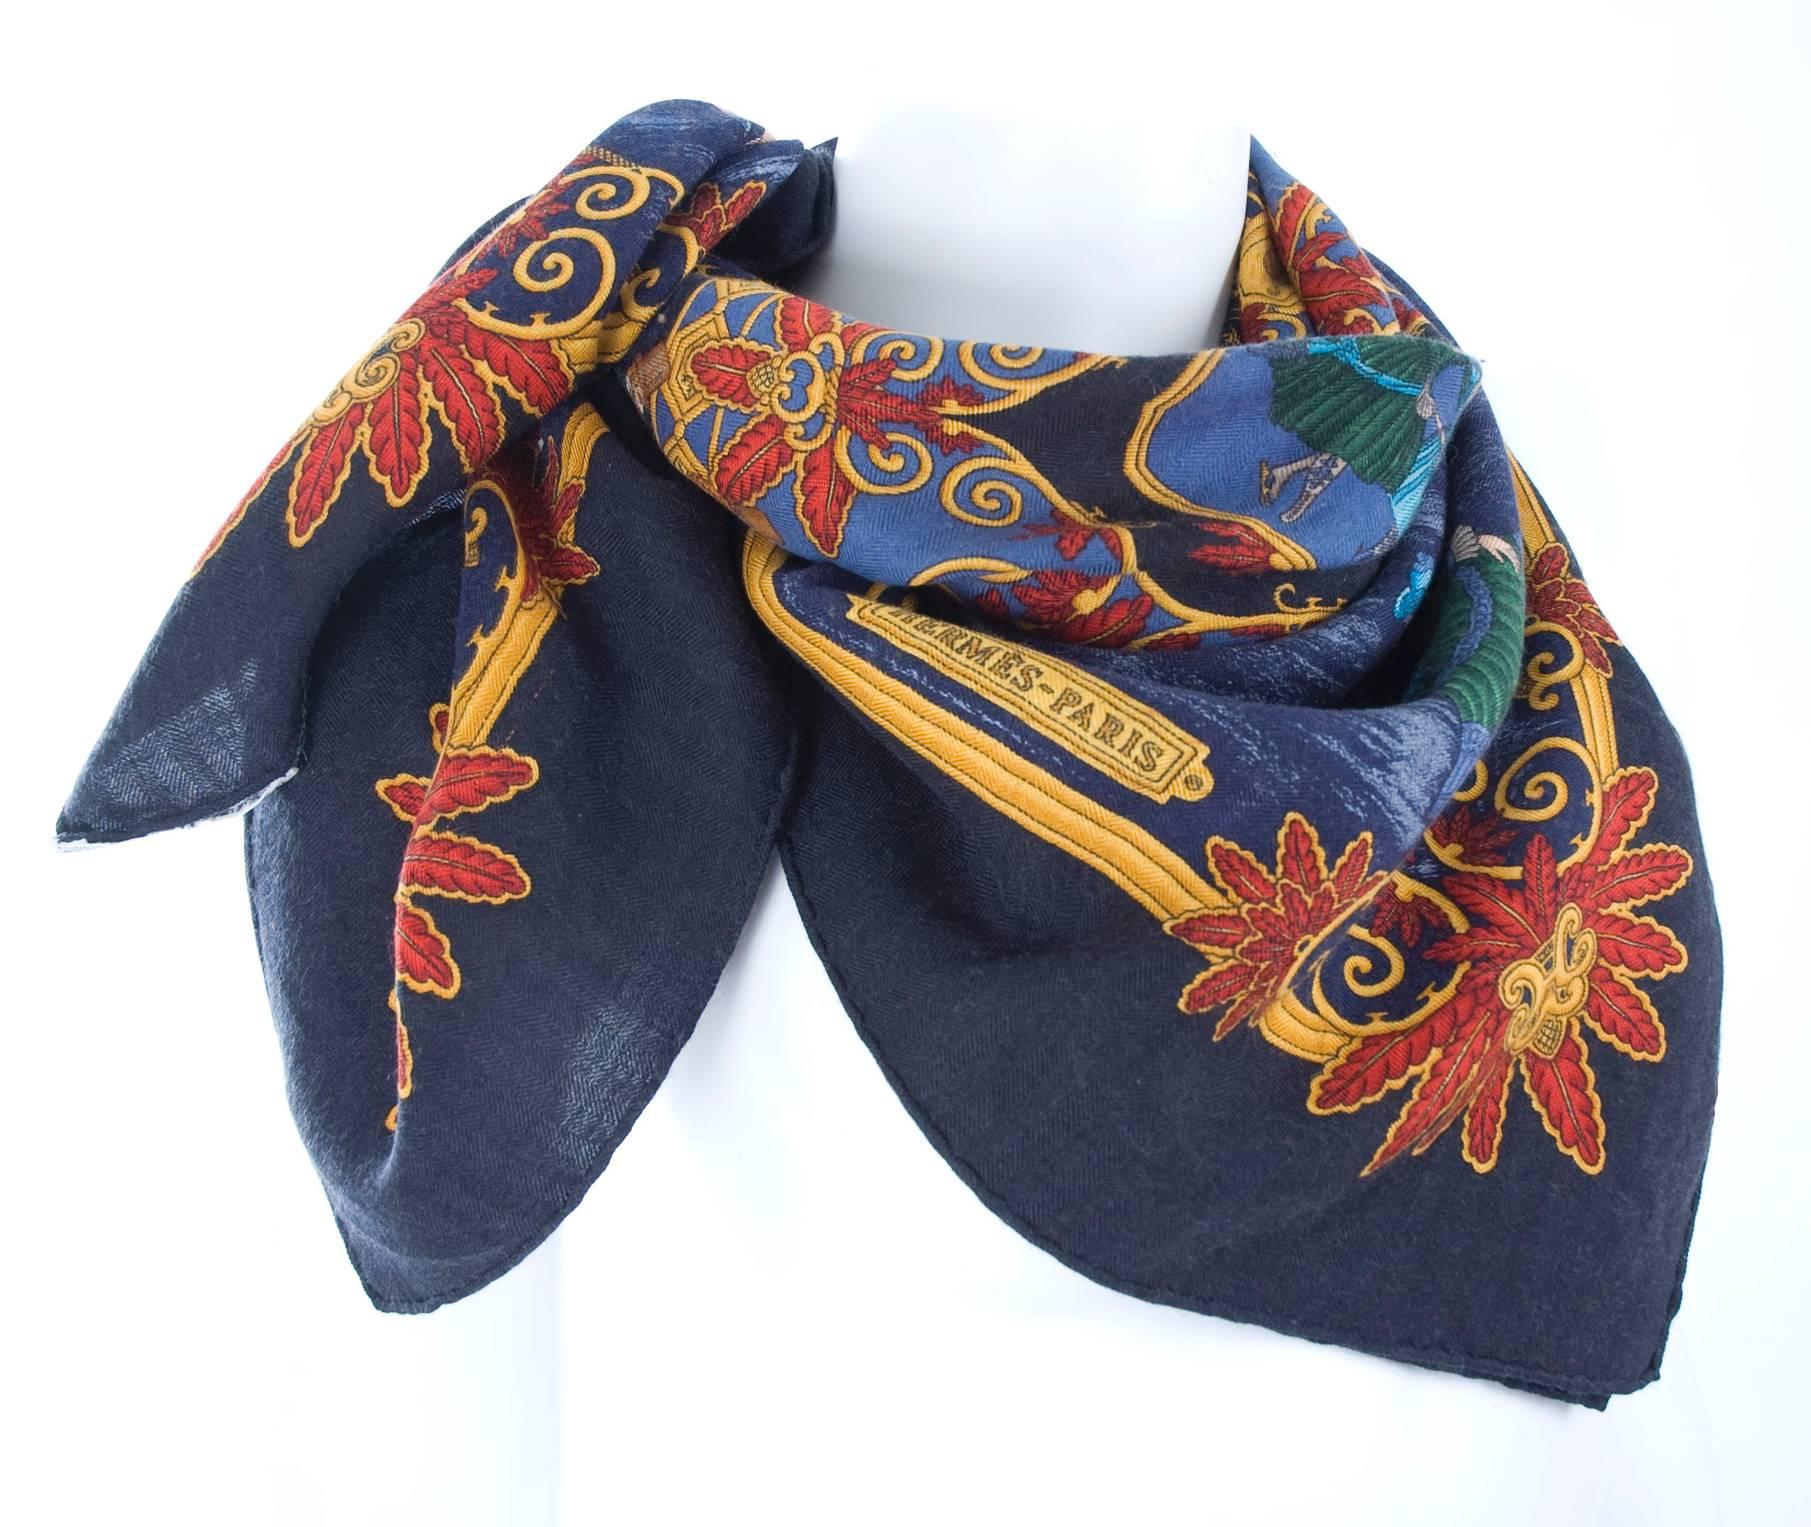 Vintage Hermes Scarf Joies D'Hiver Navy Border.
Classic Joies D'Hiver was designed by Joachim Metz and first issued in 1992.  One of the most popular Hermès scarves. 
The design depicts skaters in Victorian times having a joyous winter fun on a